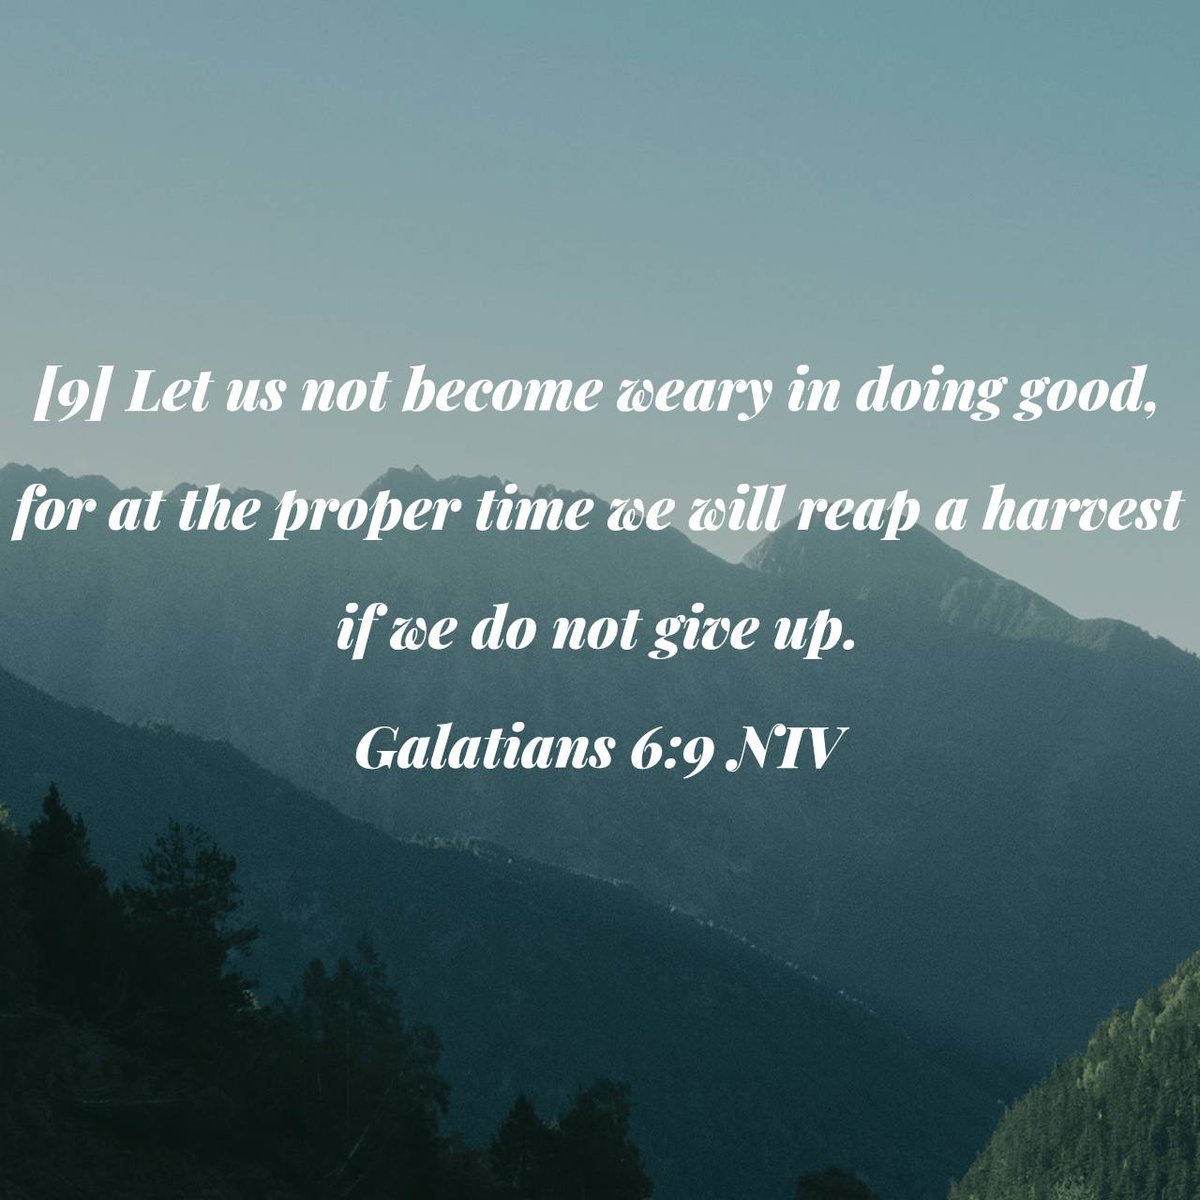 Galatians 6:9 NIV [9] Let us not become weary in doing good, for at the proper time we will reap a harvest if we do not give up. bible.com/bible/111/gal.…